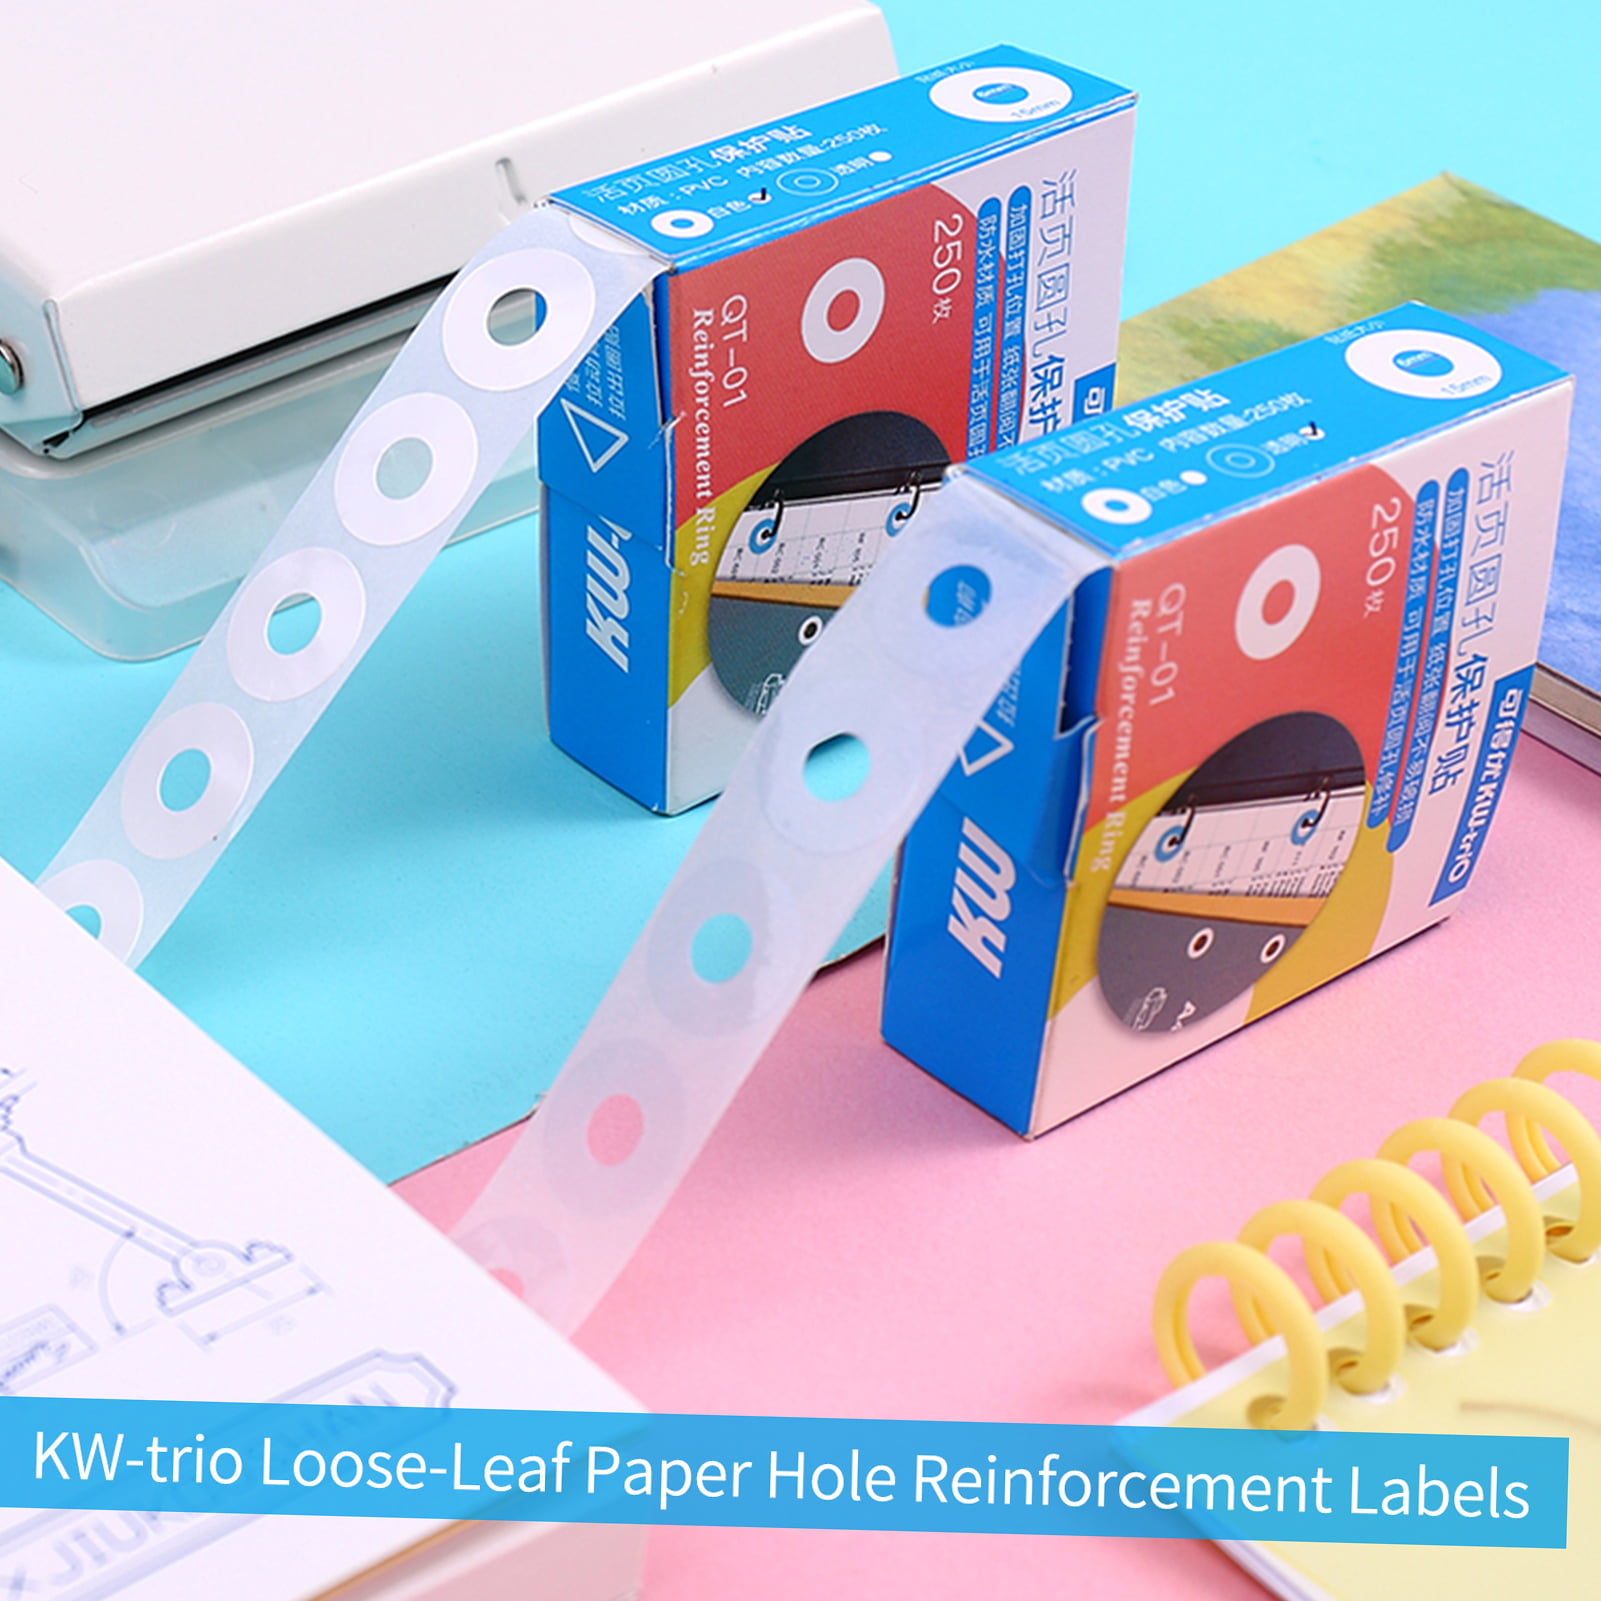 Meterk Loose- Paper Hole Reinforcement Labels Round Stickers Self-Adhesive Hole Punch Protector for Office School Home Supplies, 250 Labels, Blue